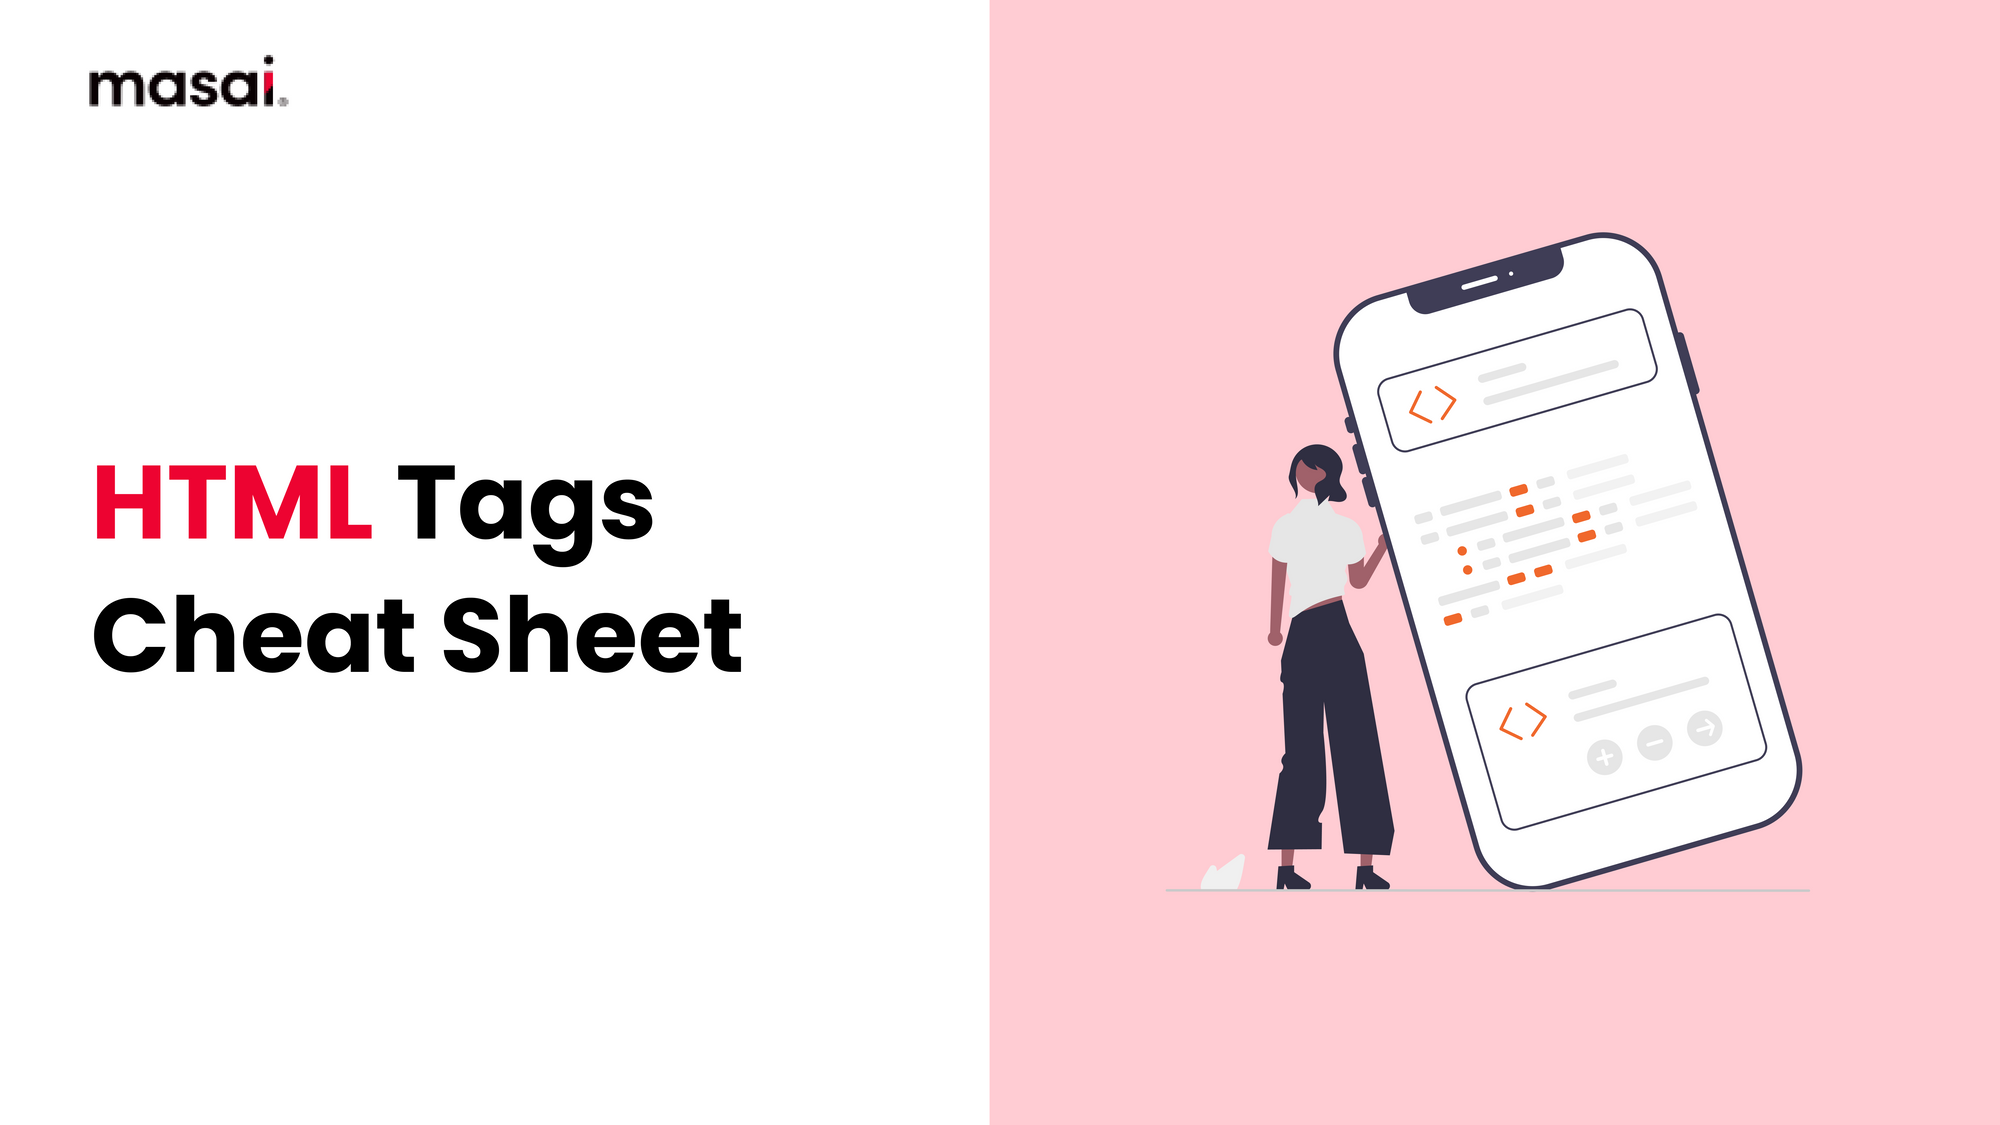 Cheat sheet for HTML tags